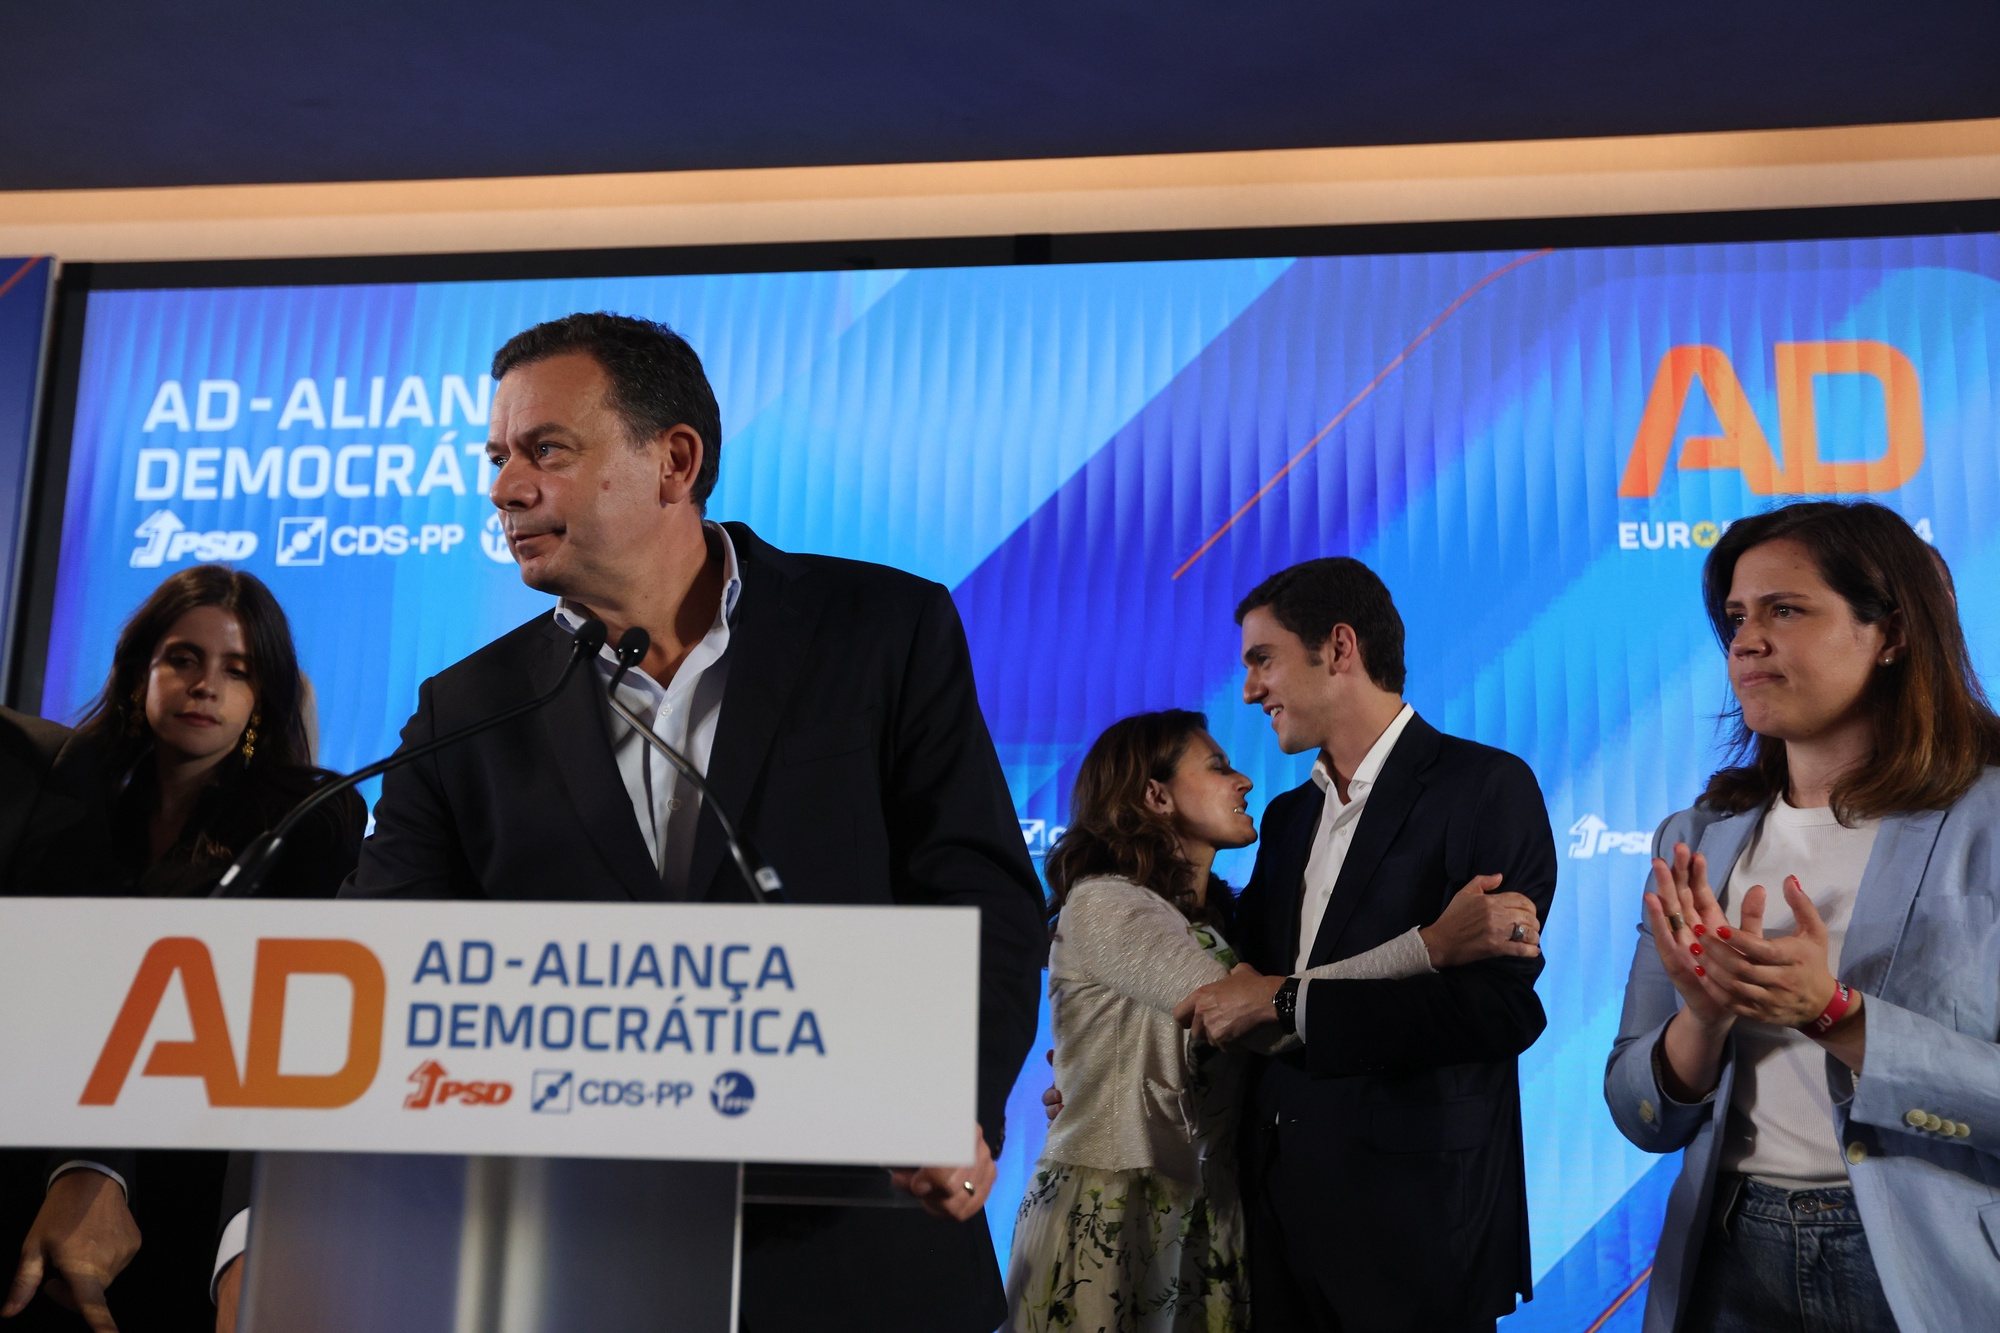 President of the Social Democratic Party (PSD) Luis Montenegro (2-L), accompanied by Alliance Democratic (AD) candidate Sebastiao Bugalho (2-R), before speaking at the party electoral headquarters after knowing the results of the European elections night in Lisbon, Portugal, 09 June 2024. More than 10.8 million registered voters in Portugal and abroad go to the polls today to choose 21 of the 720 members of the European Parliament. TIAGO PETINGA/LUSA